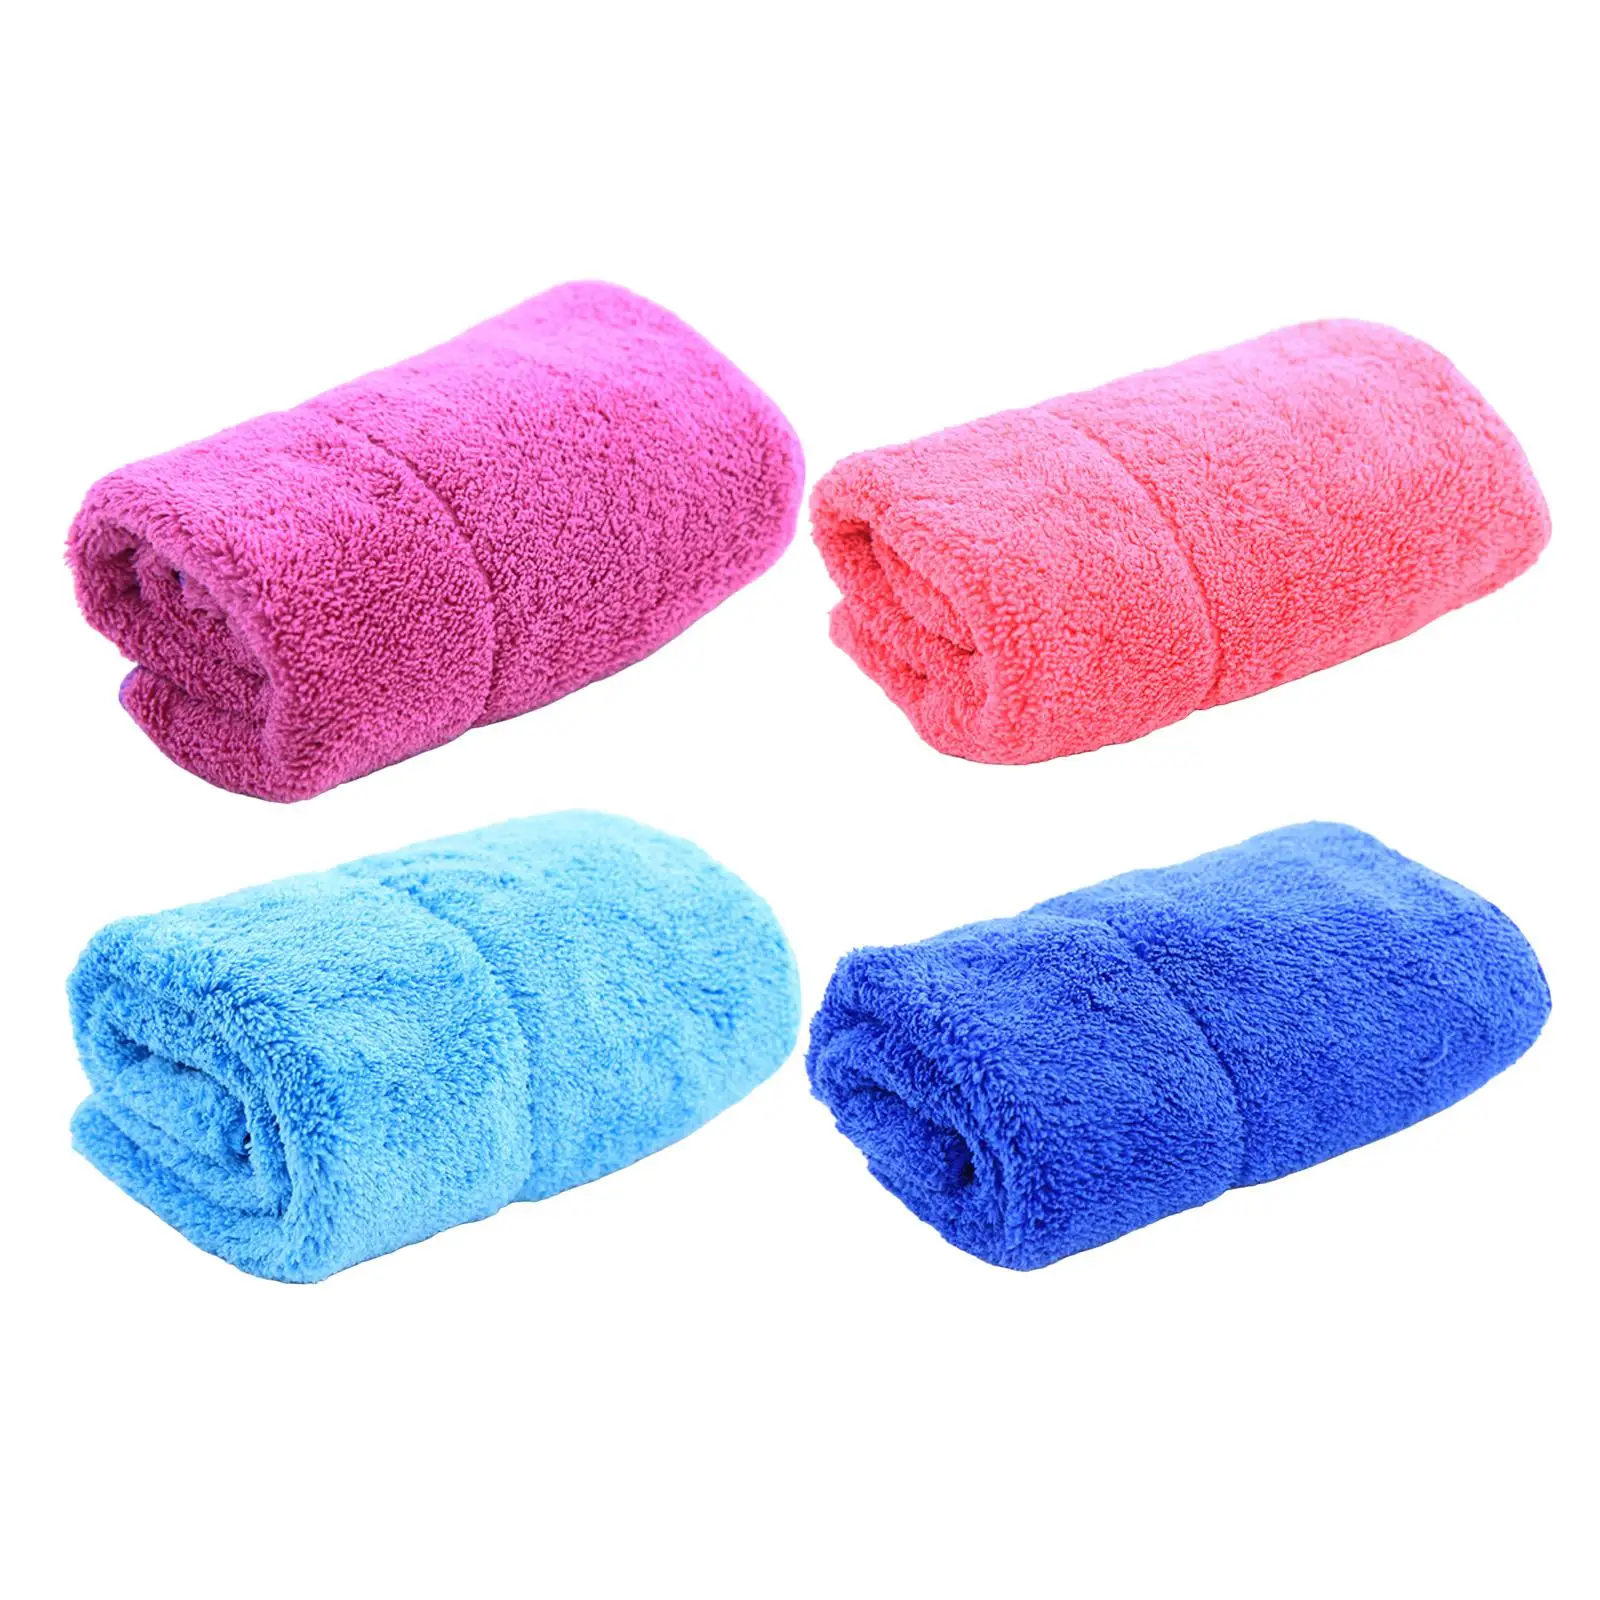 Ice Skate Wipe Cloth Cleaning Washcloths Protective Car Bathroom Care